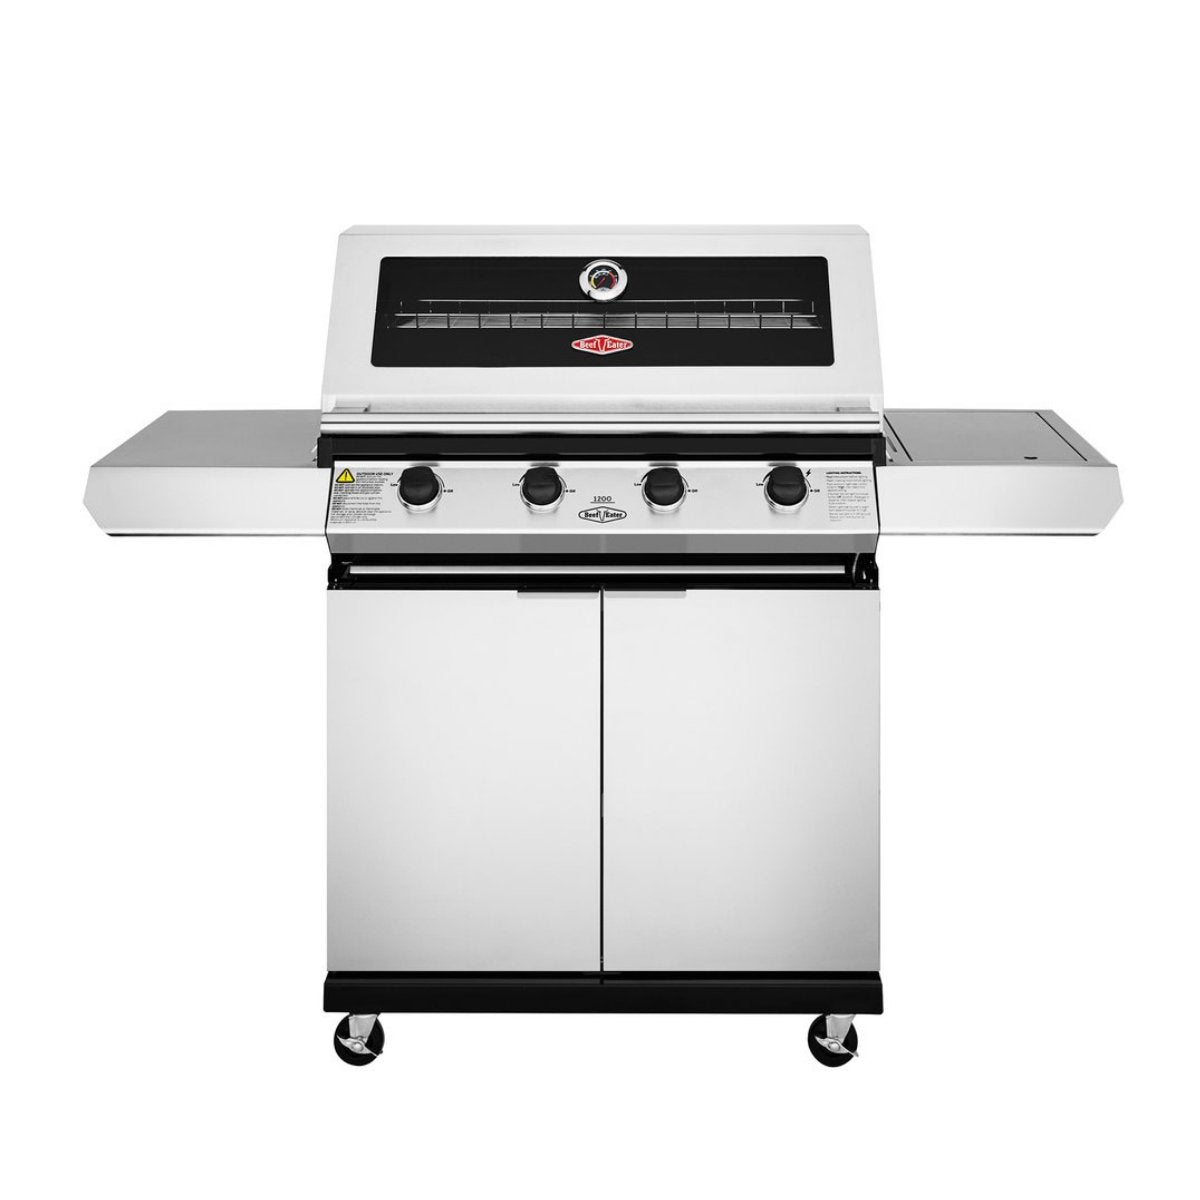 Beefeater 1200S 4 Burner Grill and Side Burner with Cart - Kitchen In The Garden